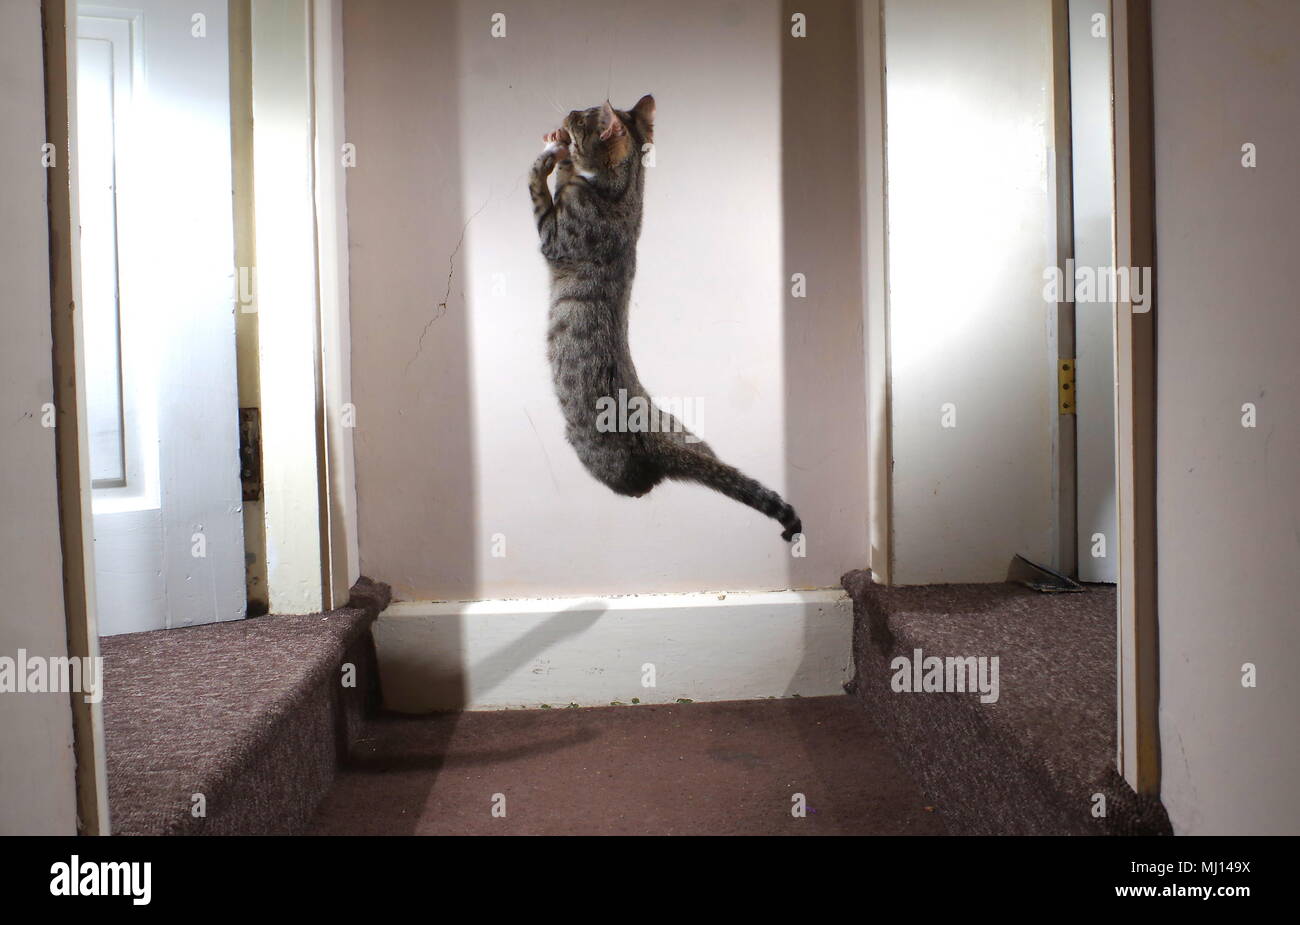 Tabby cat jumping with shadow Stock Photo